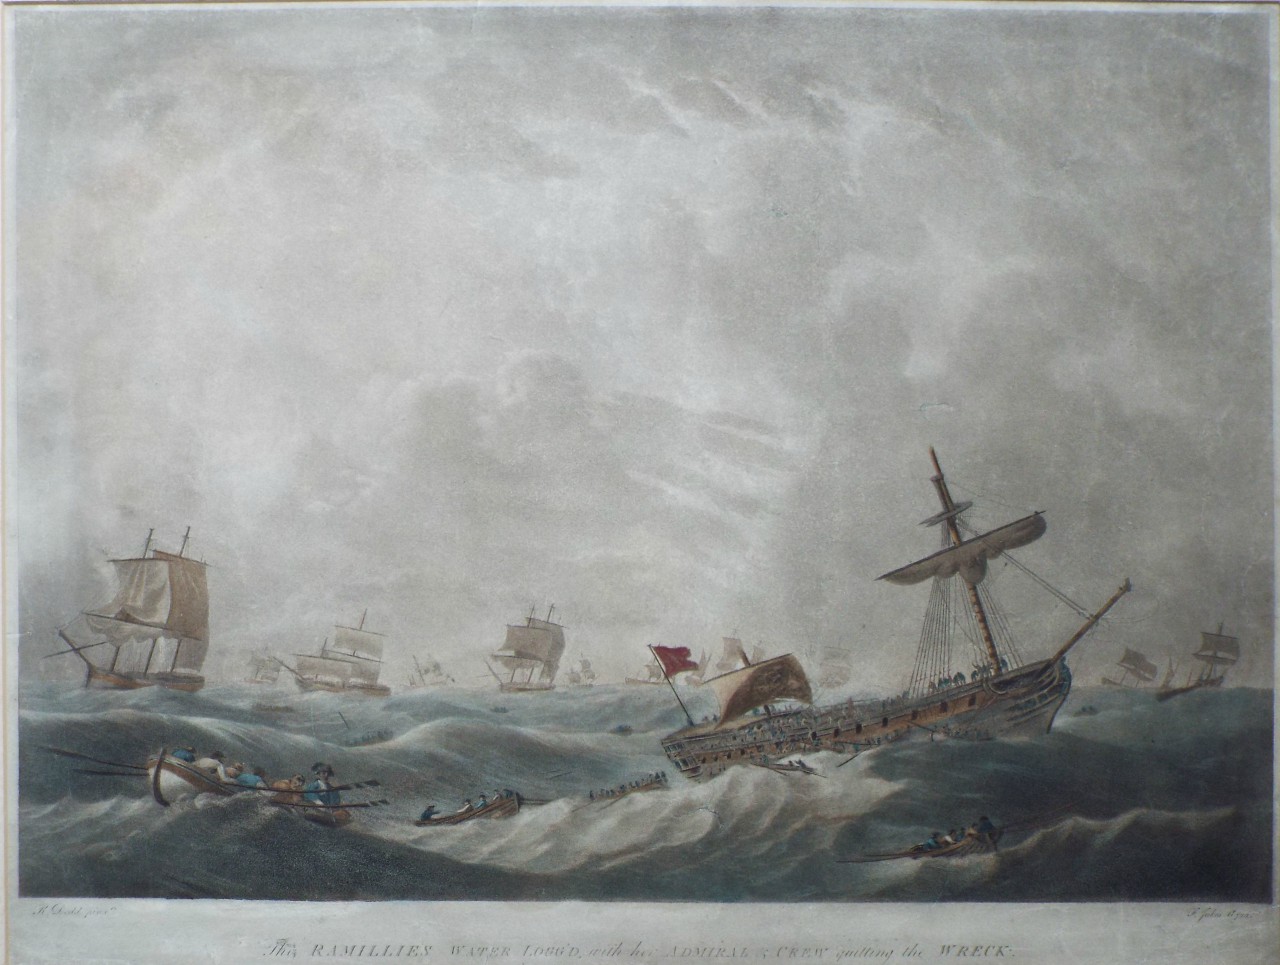 Aquatint - The Ramillies Water Logged, with her Admiral & Crew quitting the Wreck. - Jukes